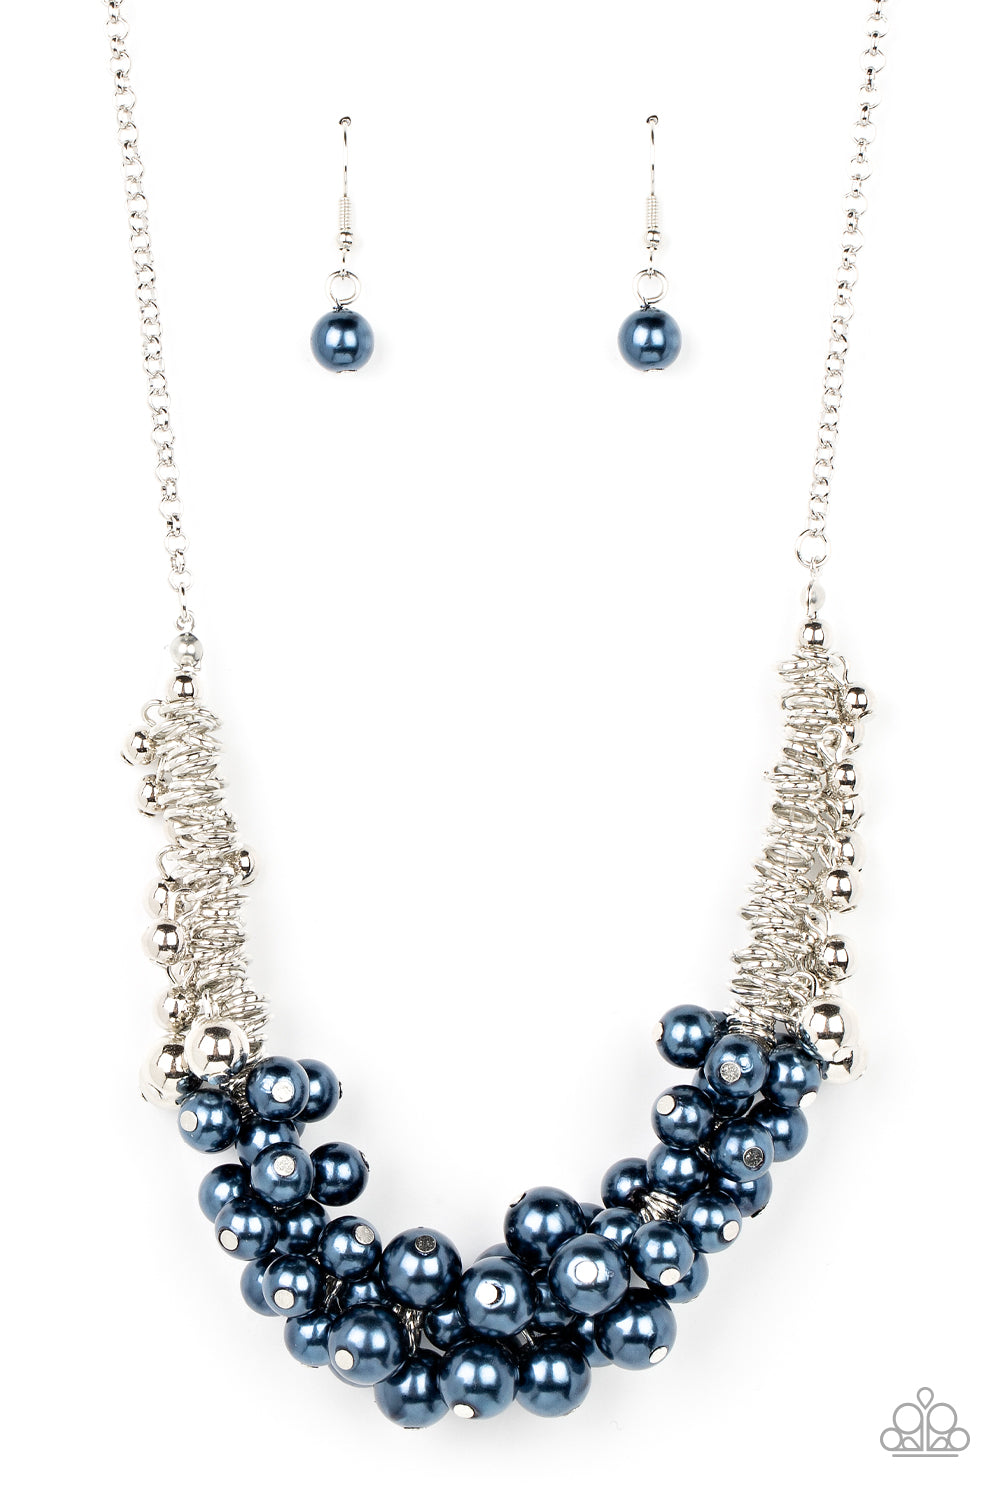 Paparazzi Accessories - Bonus Points - Blue Necklace a bubbly cluster of blue pearls are bunched together between hanging silver beads that dangle between jampacked rows of silver rings, resulting in exaggerated effervescence below the collar. Features an adjustable clasp closure.  Sold as one individual necklace. Includes one pair of matching earrings.